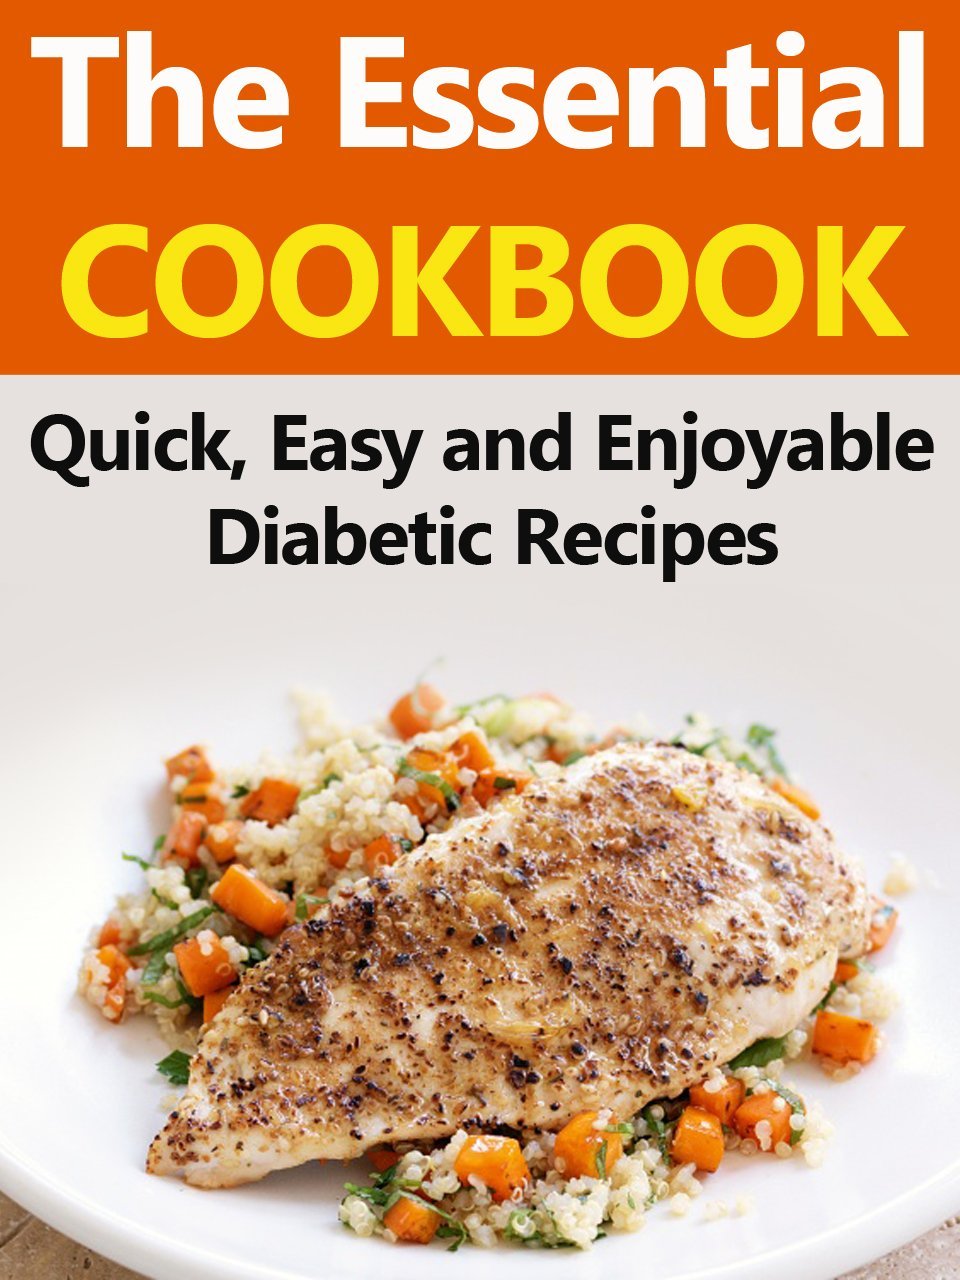 The Essential Cookbook: Quick, Easy and Enjoyable Diabetic Recipes by Matthew Jones